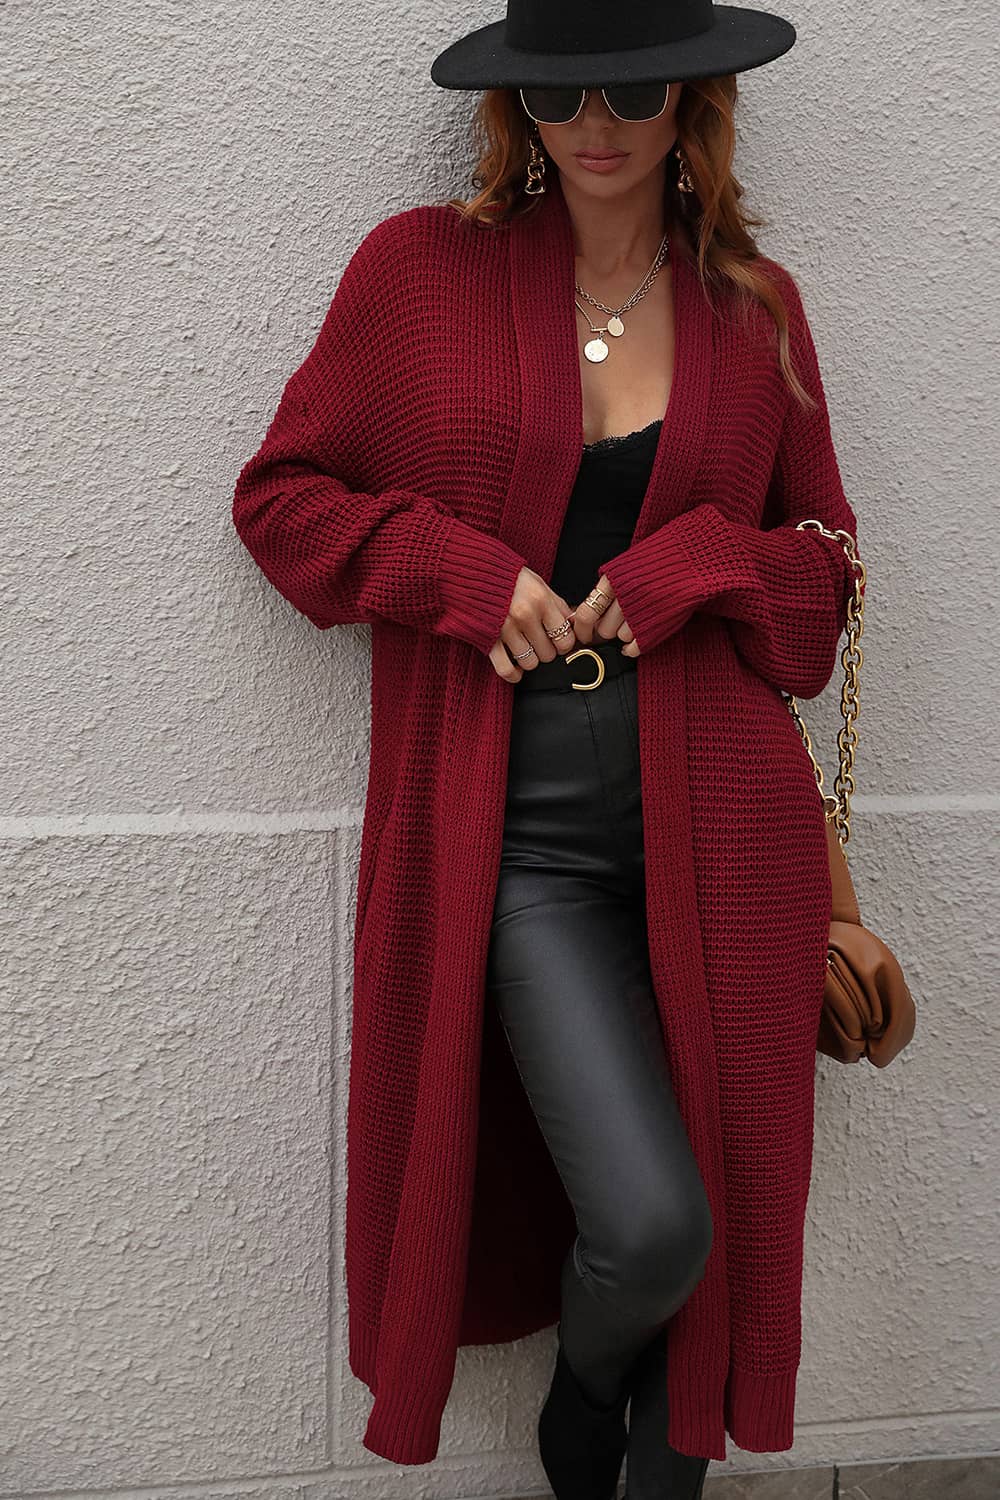 Women's loose solid color knitted cardigan sweater